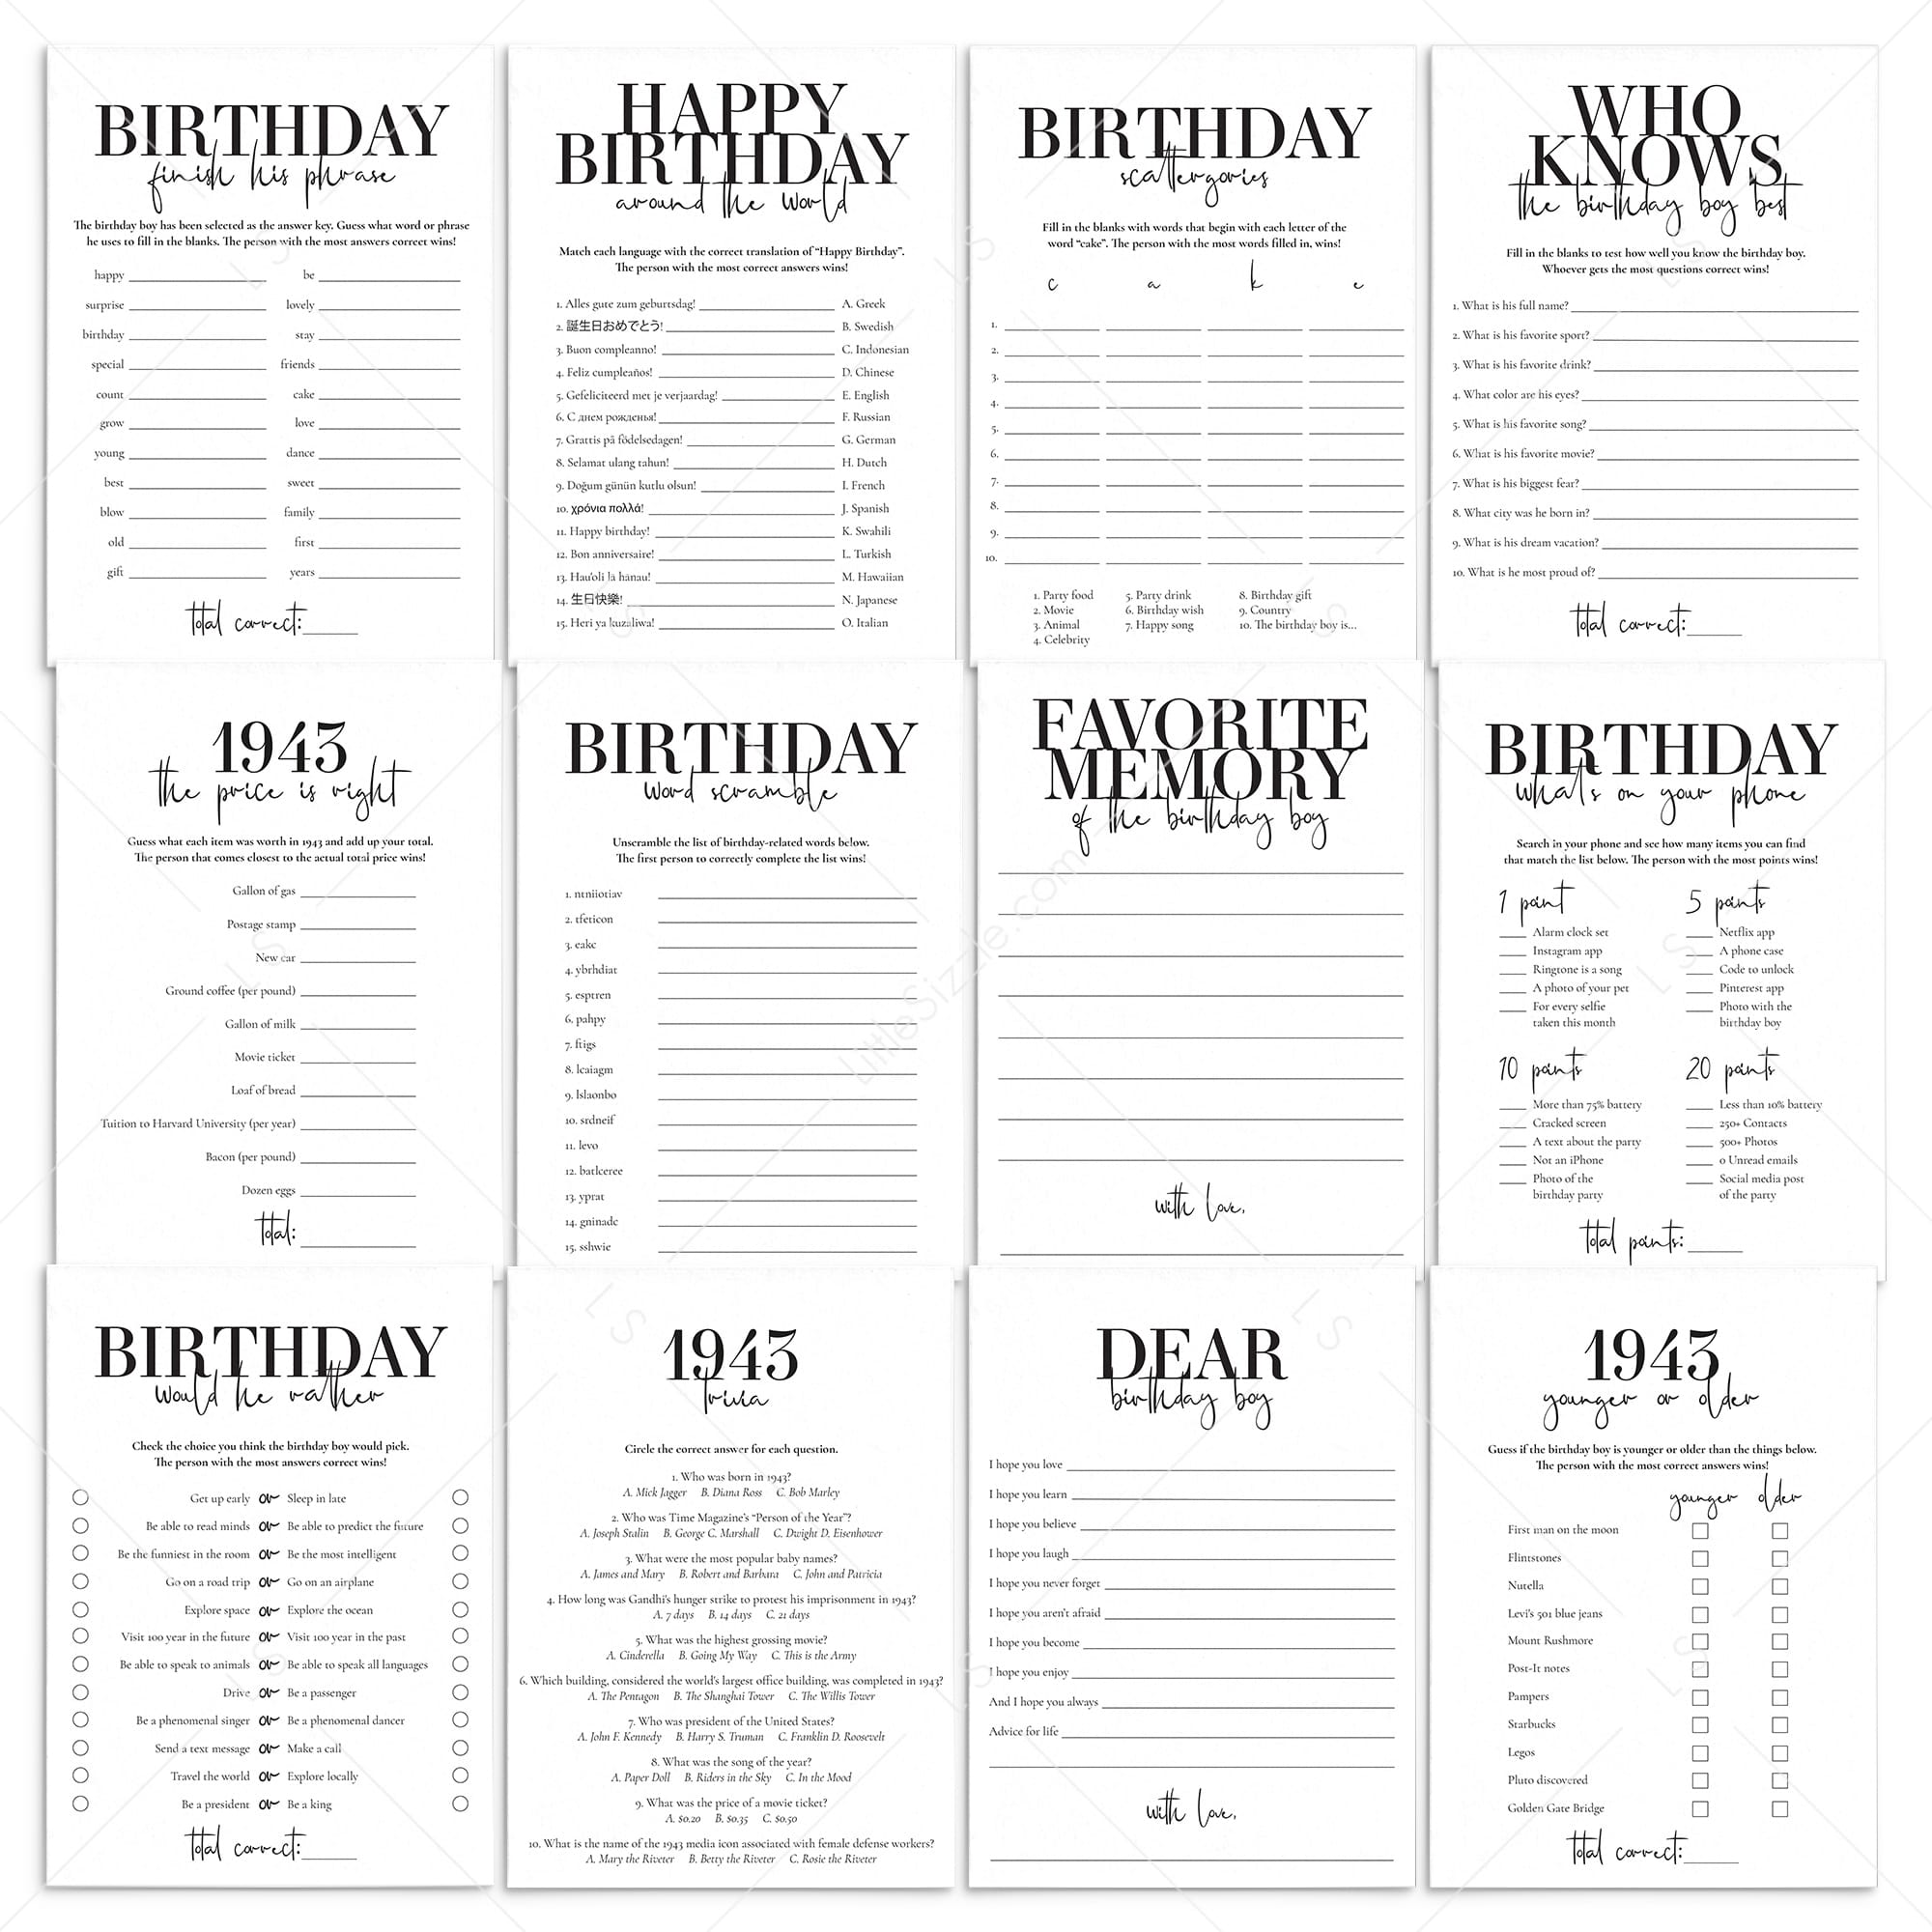 Born in 1943 80th Birthday Party Games Bundle For Men by LittleSizzle